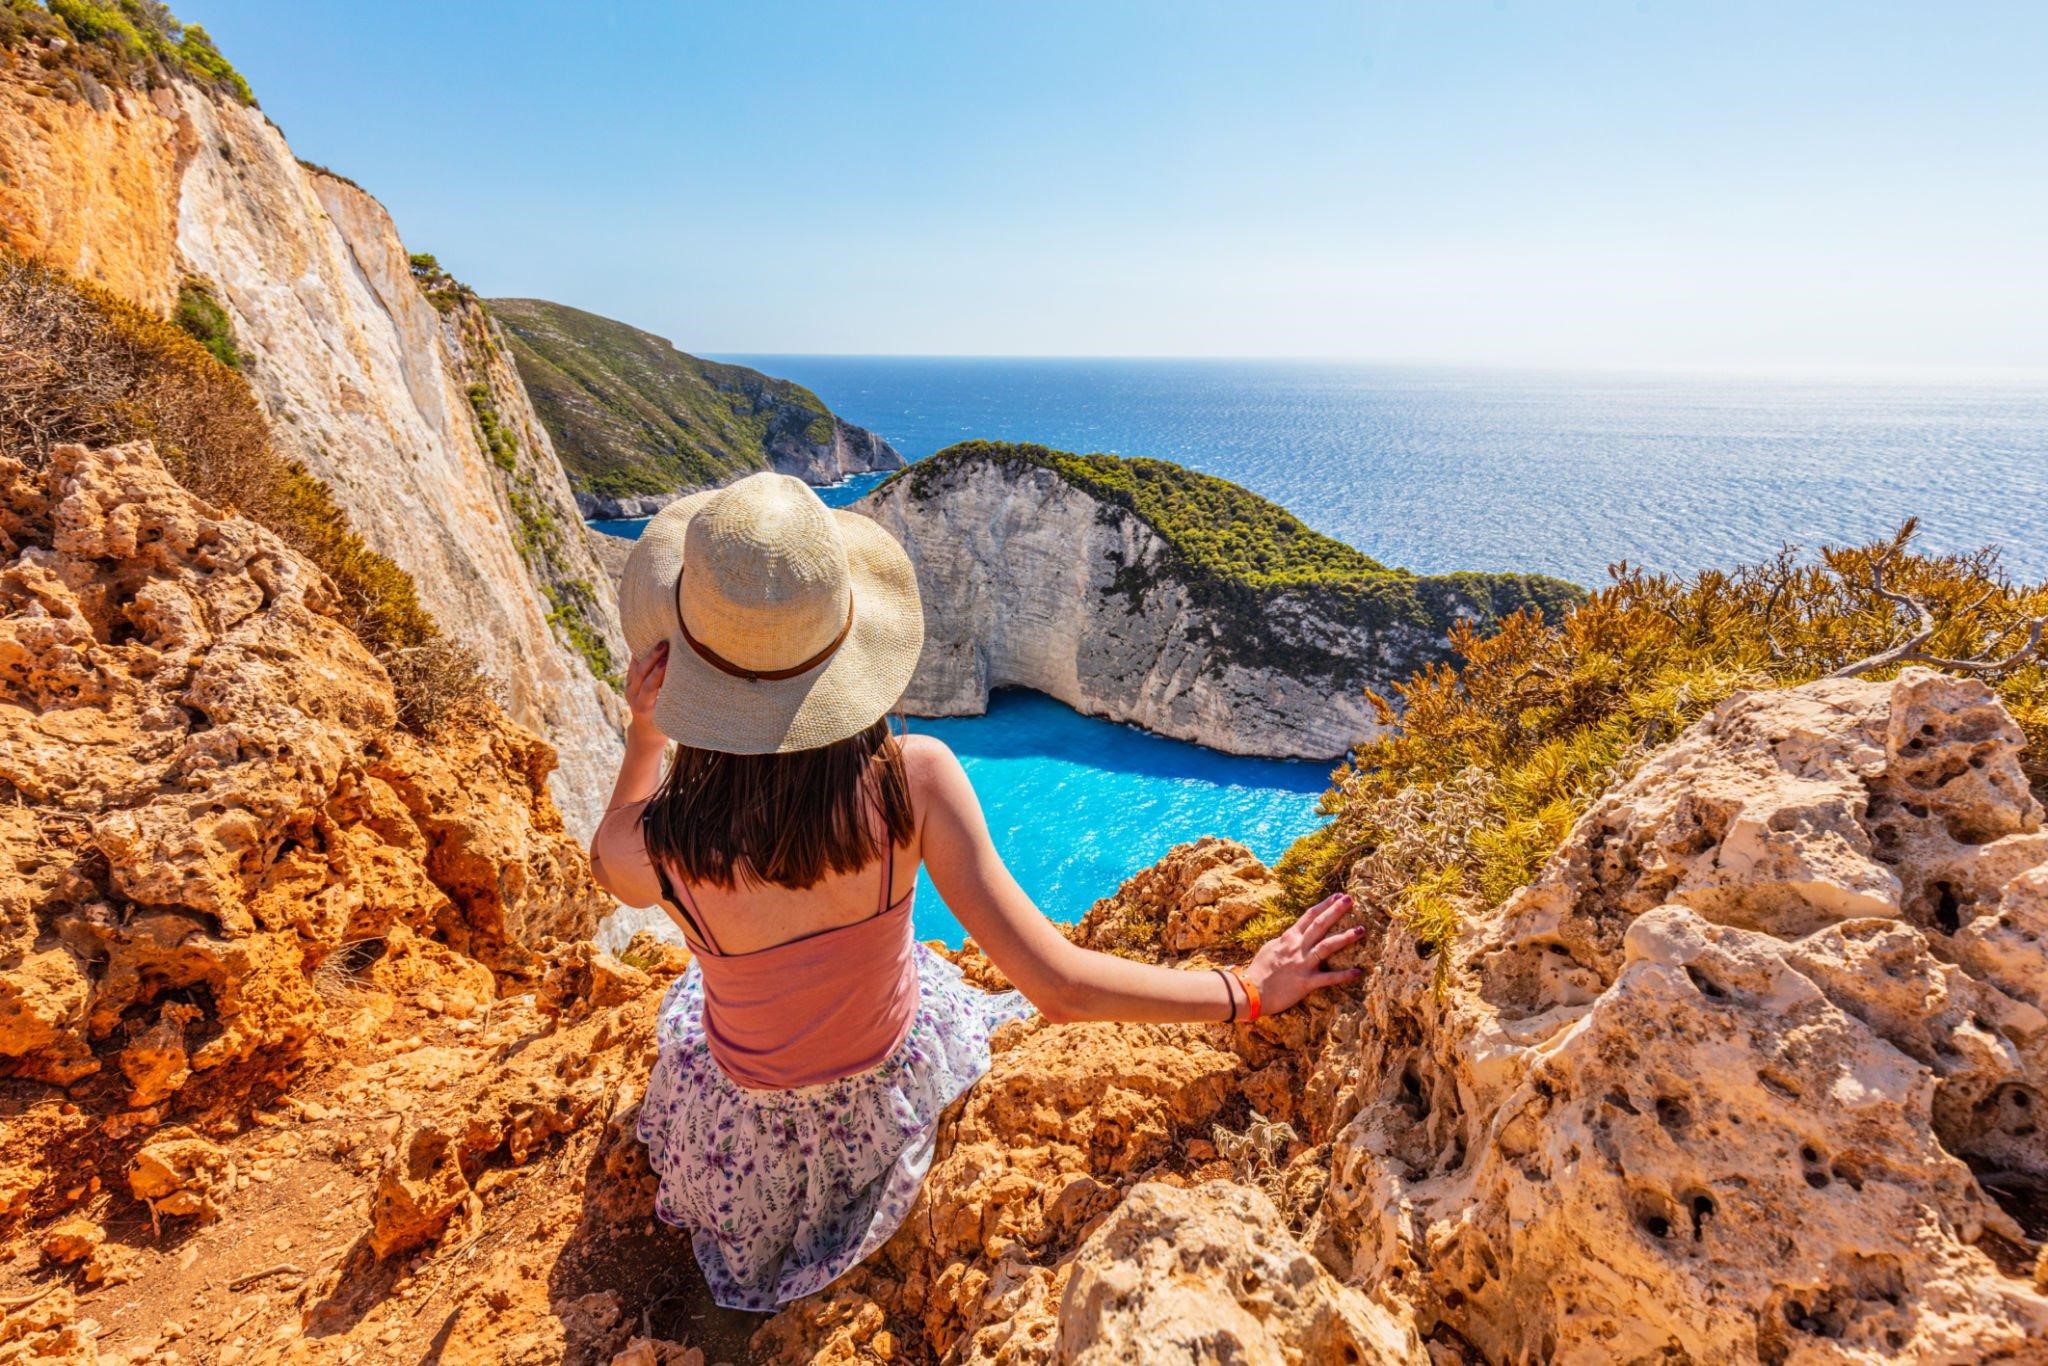 What Are the Various Things to Do in Zante?